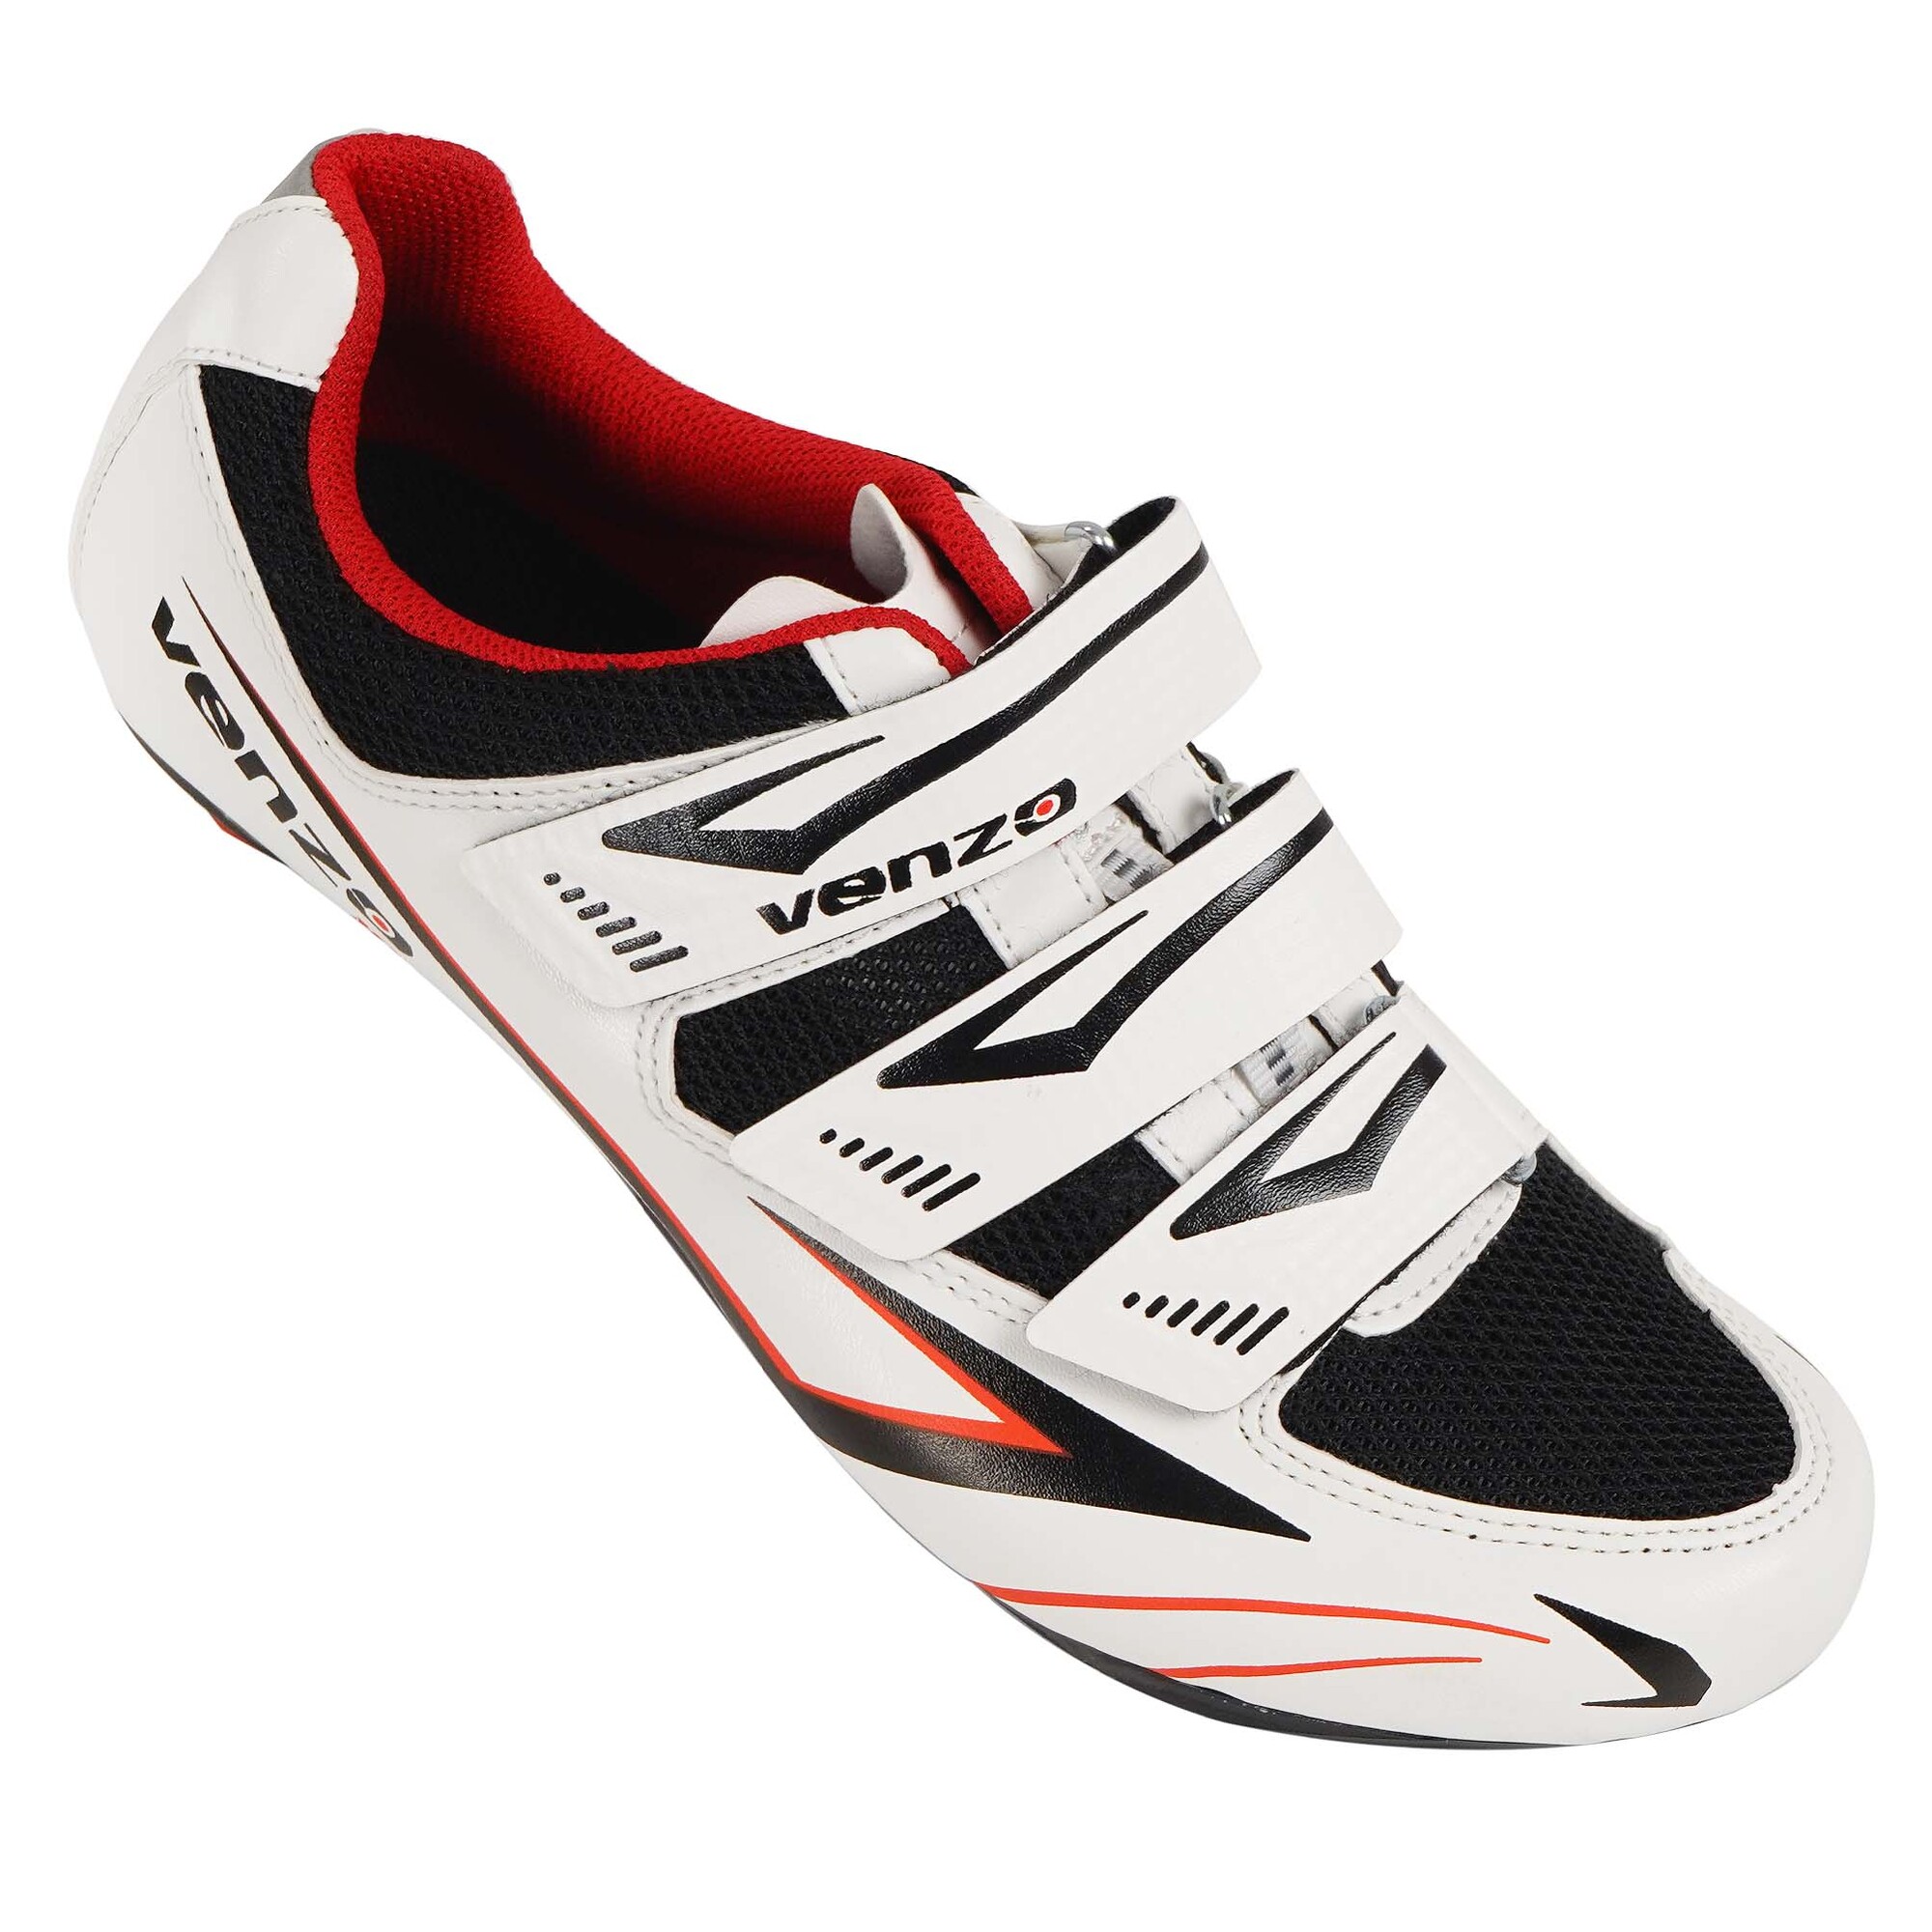 Venzo Road Bike For Shimano SPD SL Look Cycling Bicycle Shoes 41